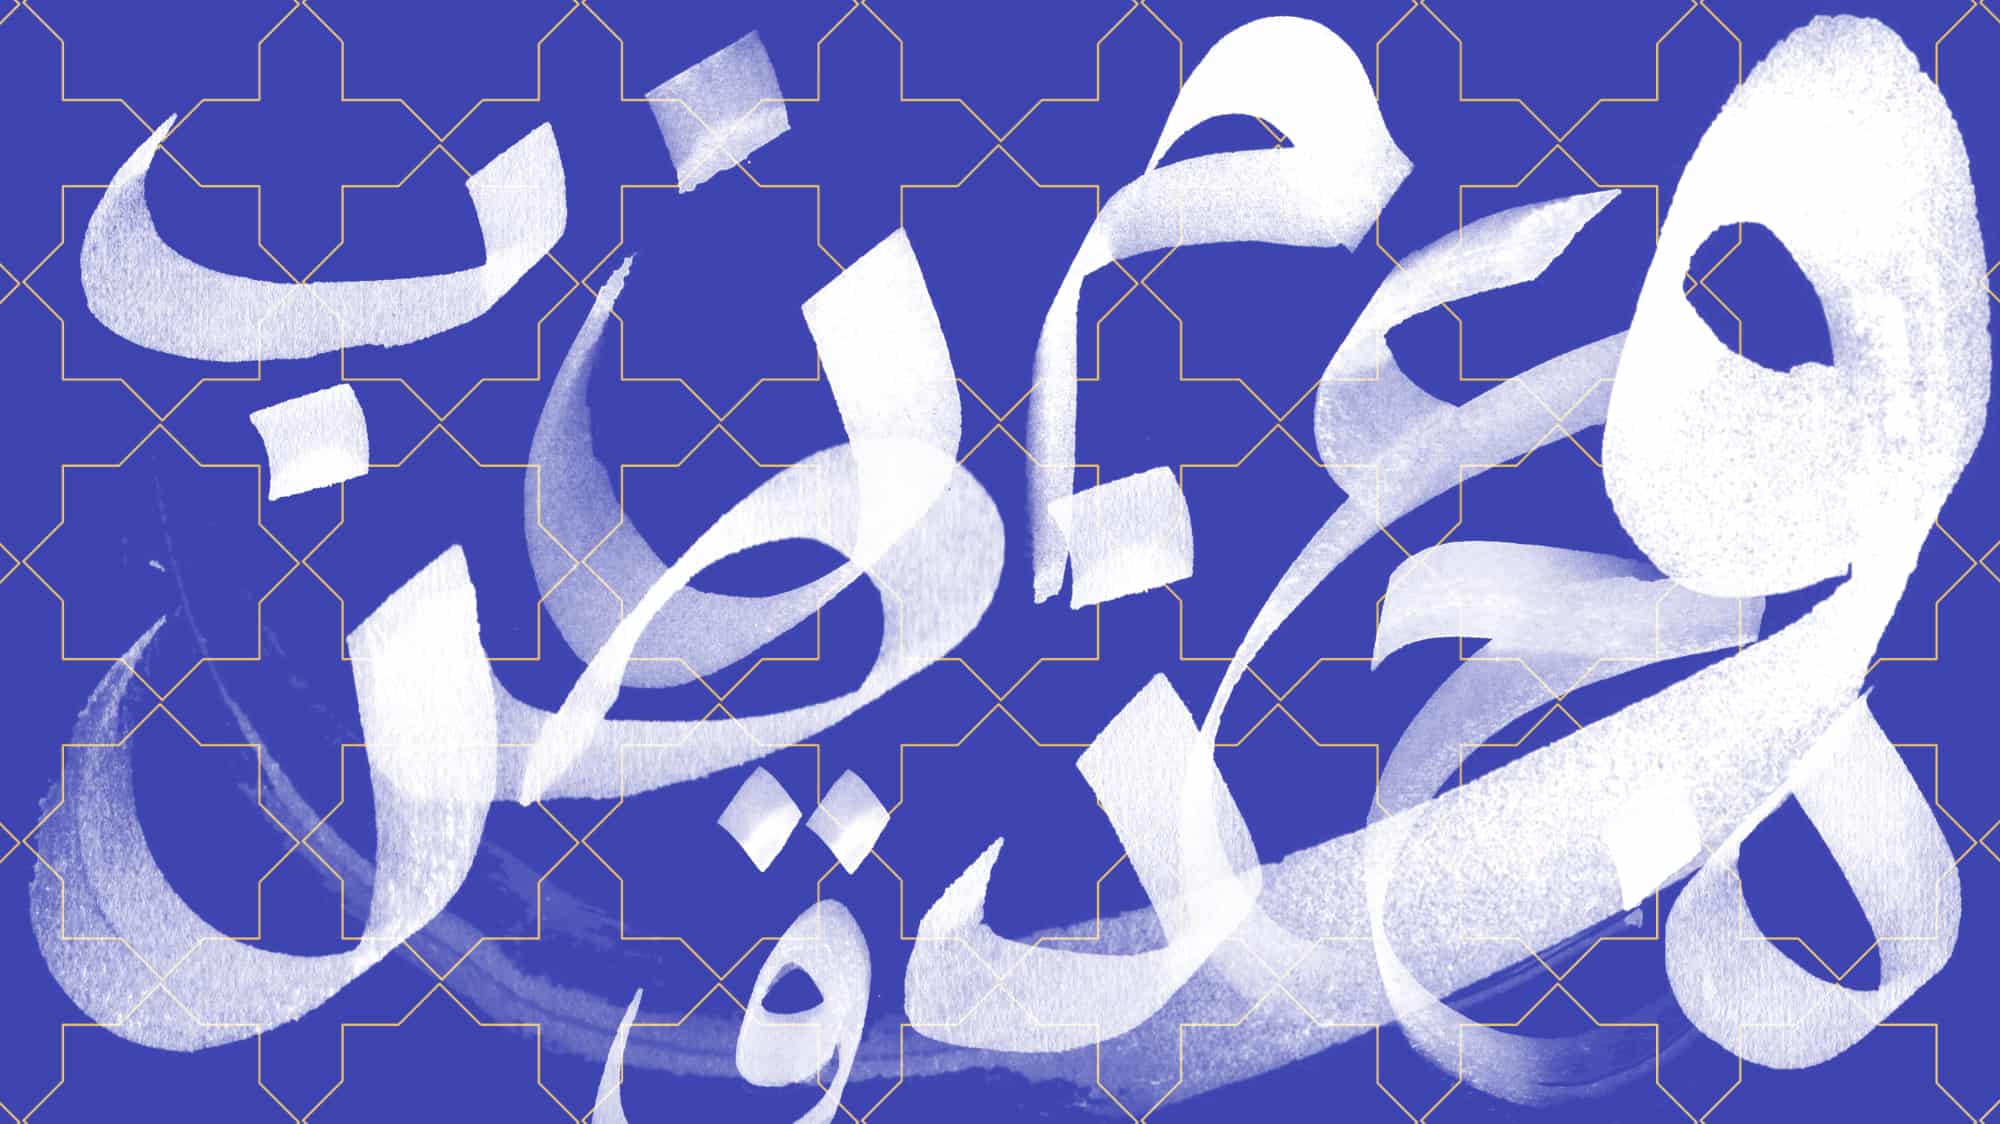 Arabic calligraphy letters